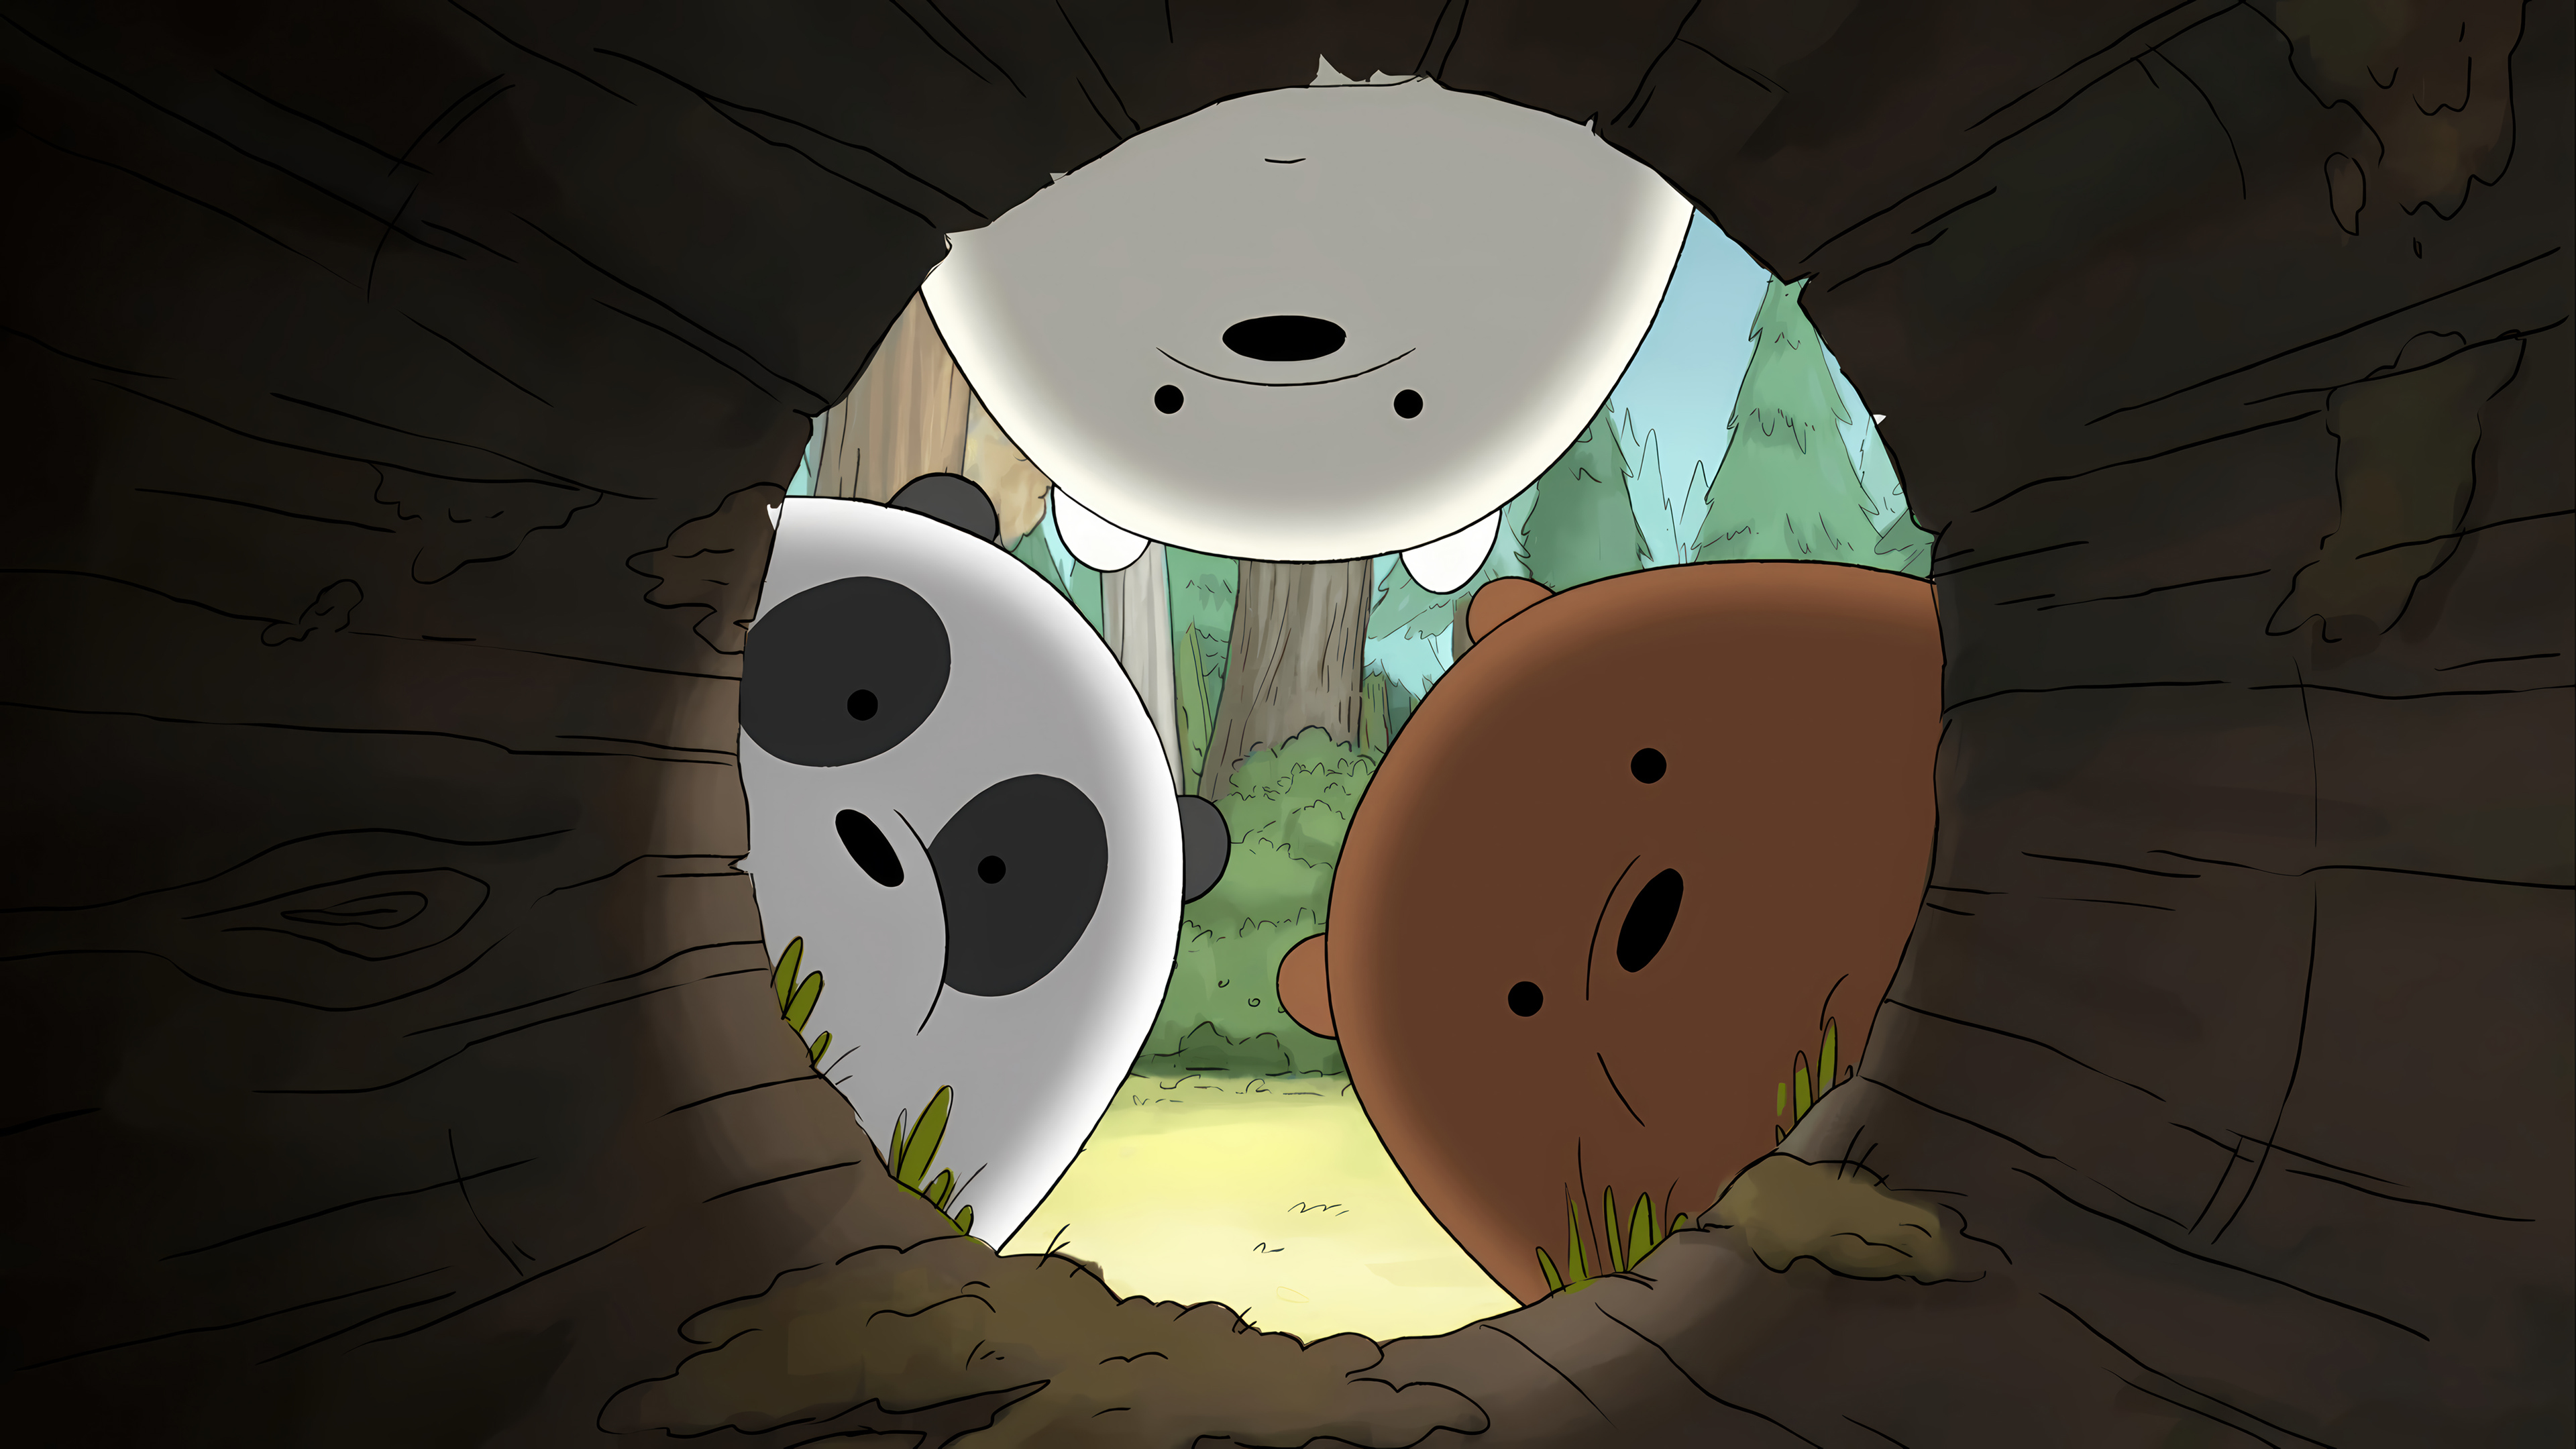 100+] We Bare Bears Aesthetic Backgrounds | Wallpapers.com